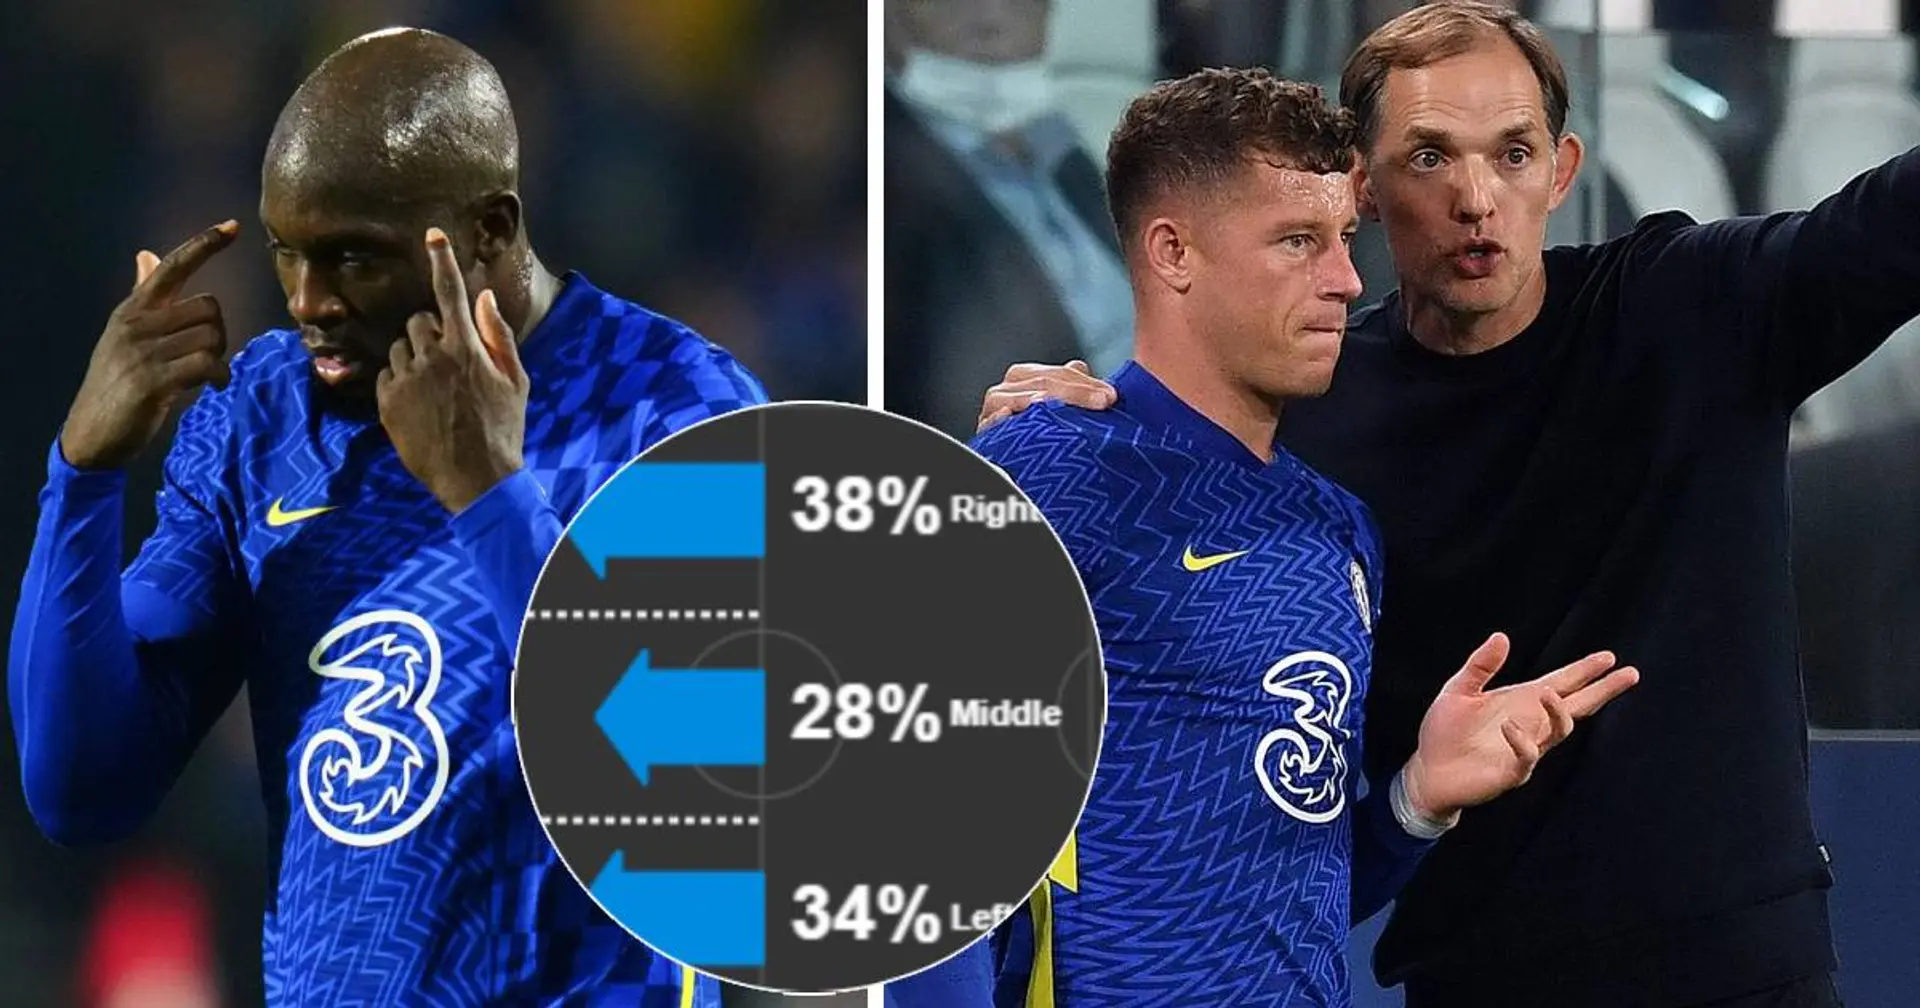 Fans bemoan lack of midfield service to forwards in Zenit loss - Analysing if Blues' passing let them down